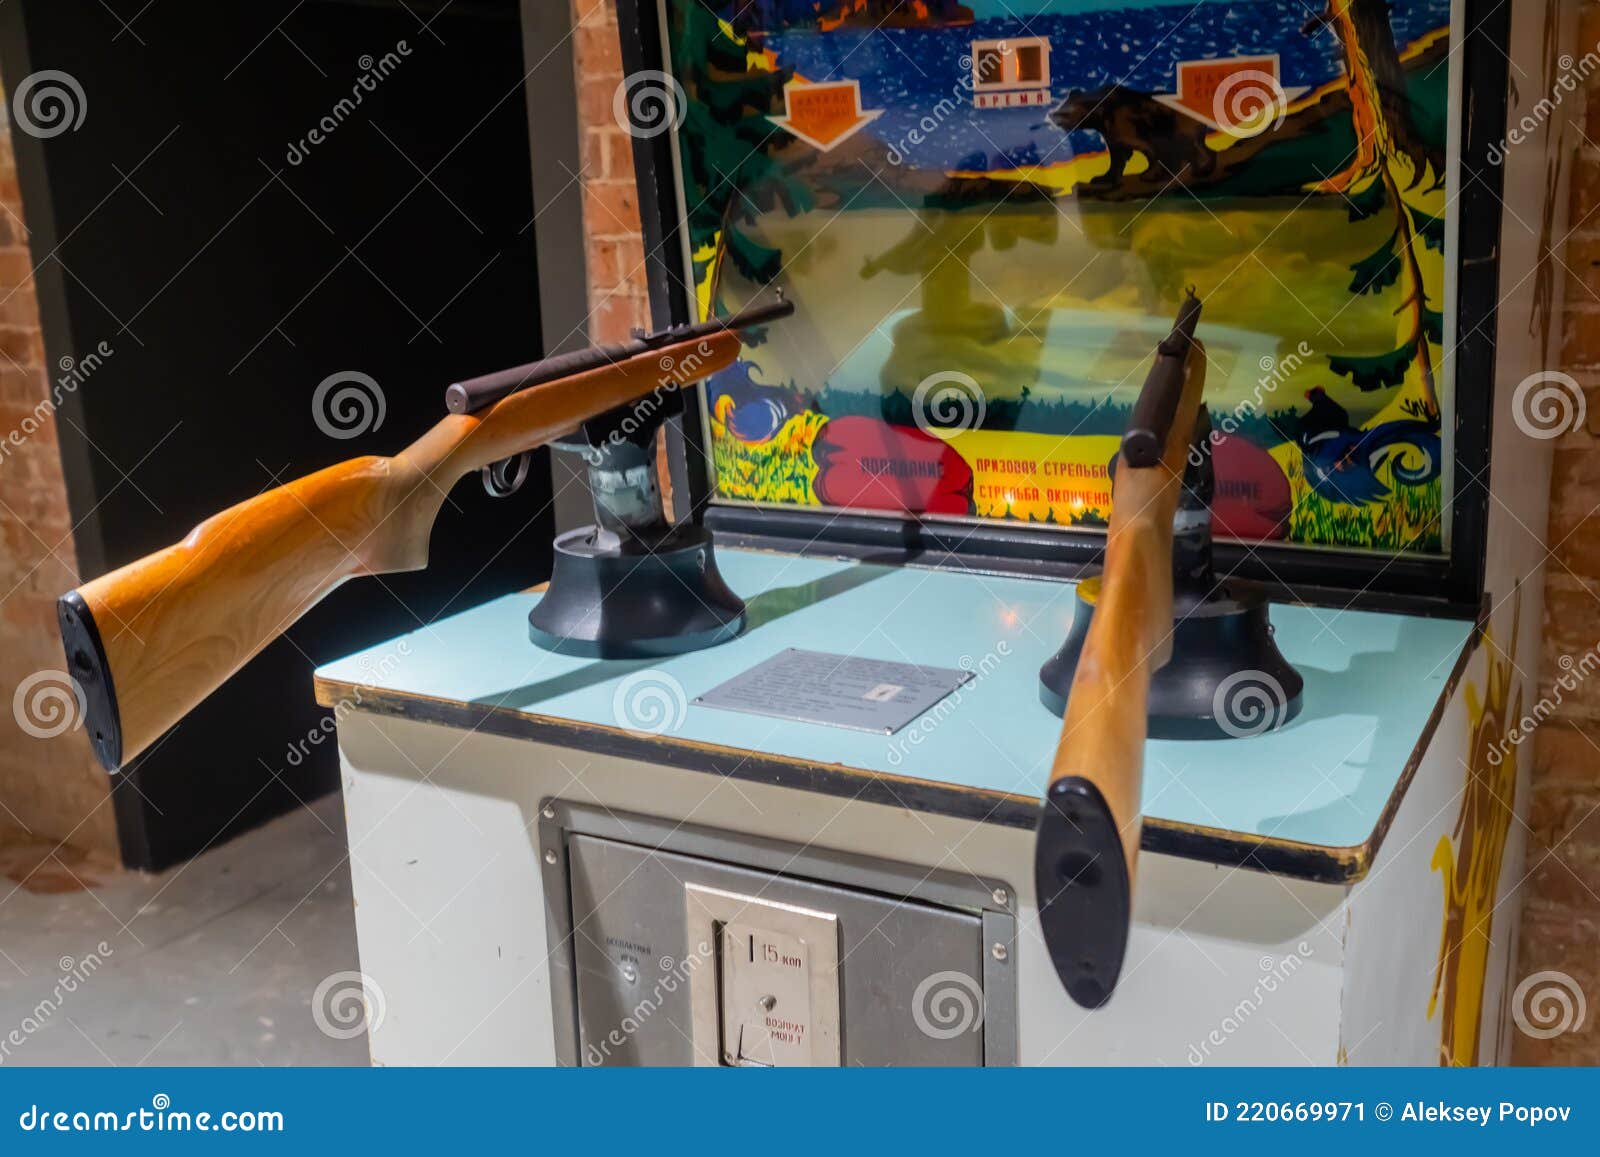 Soviet Retro Arcade Shooting Machine Game for Two Players Editorial Photo